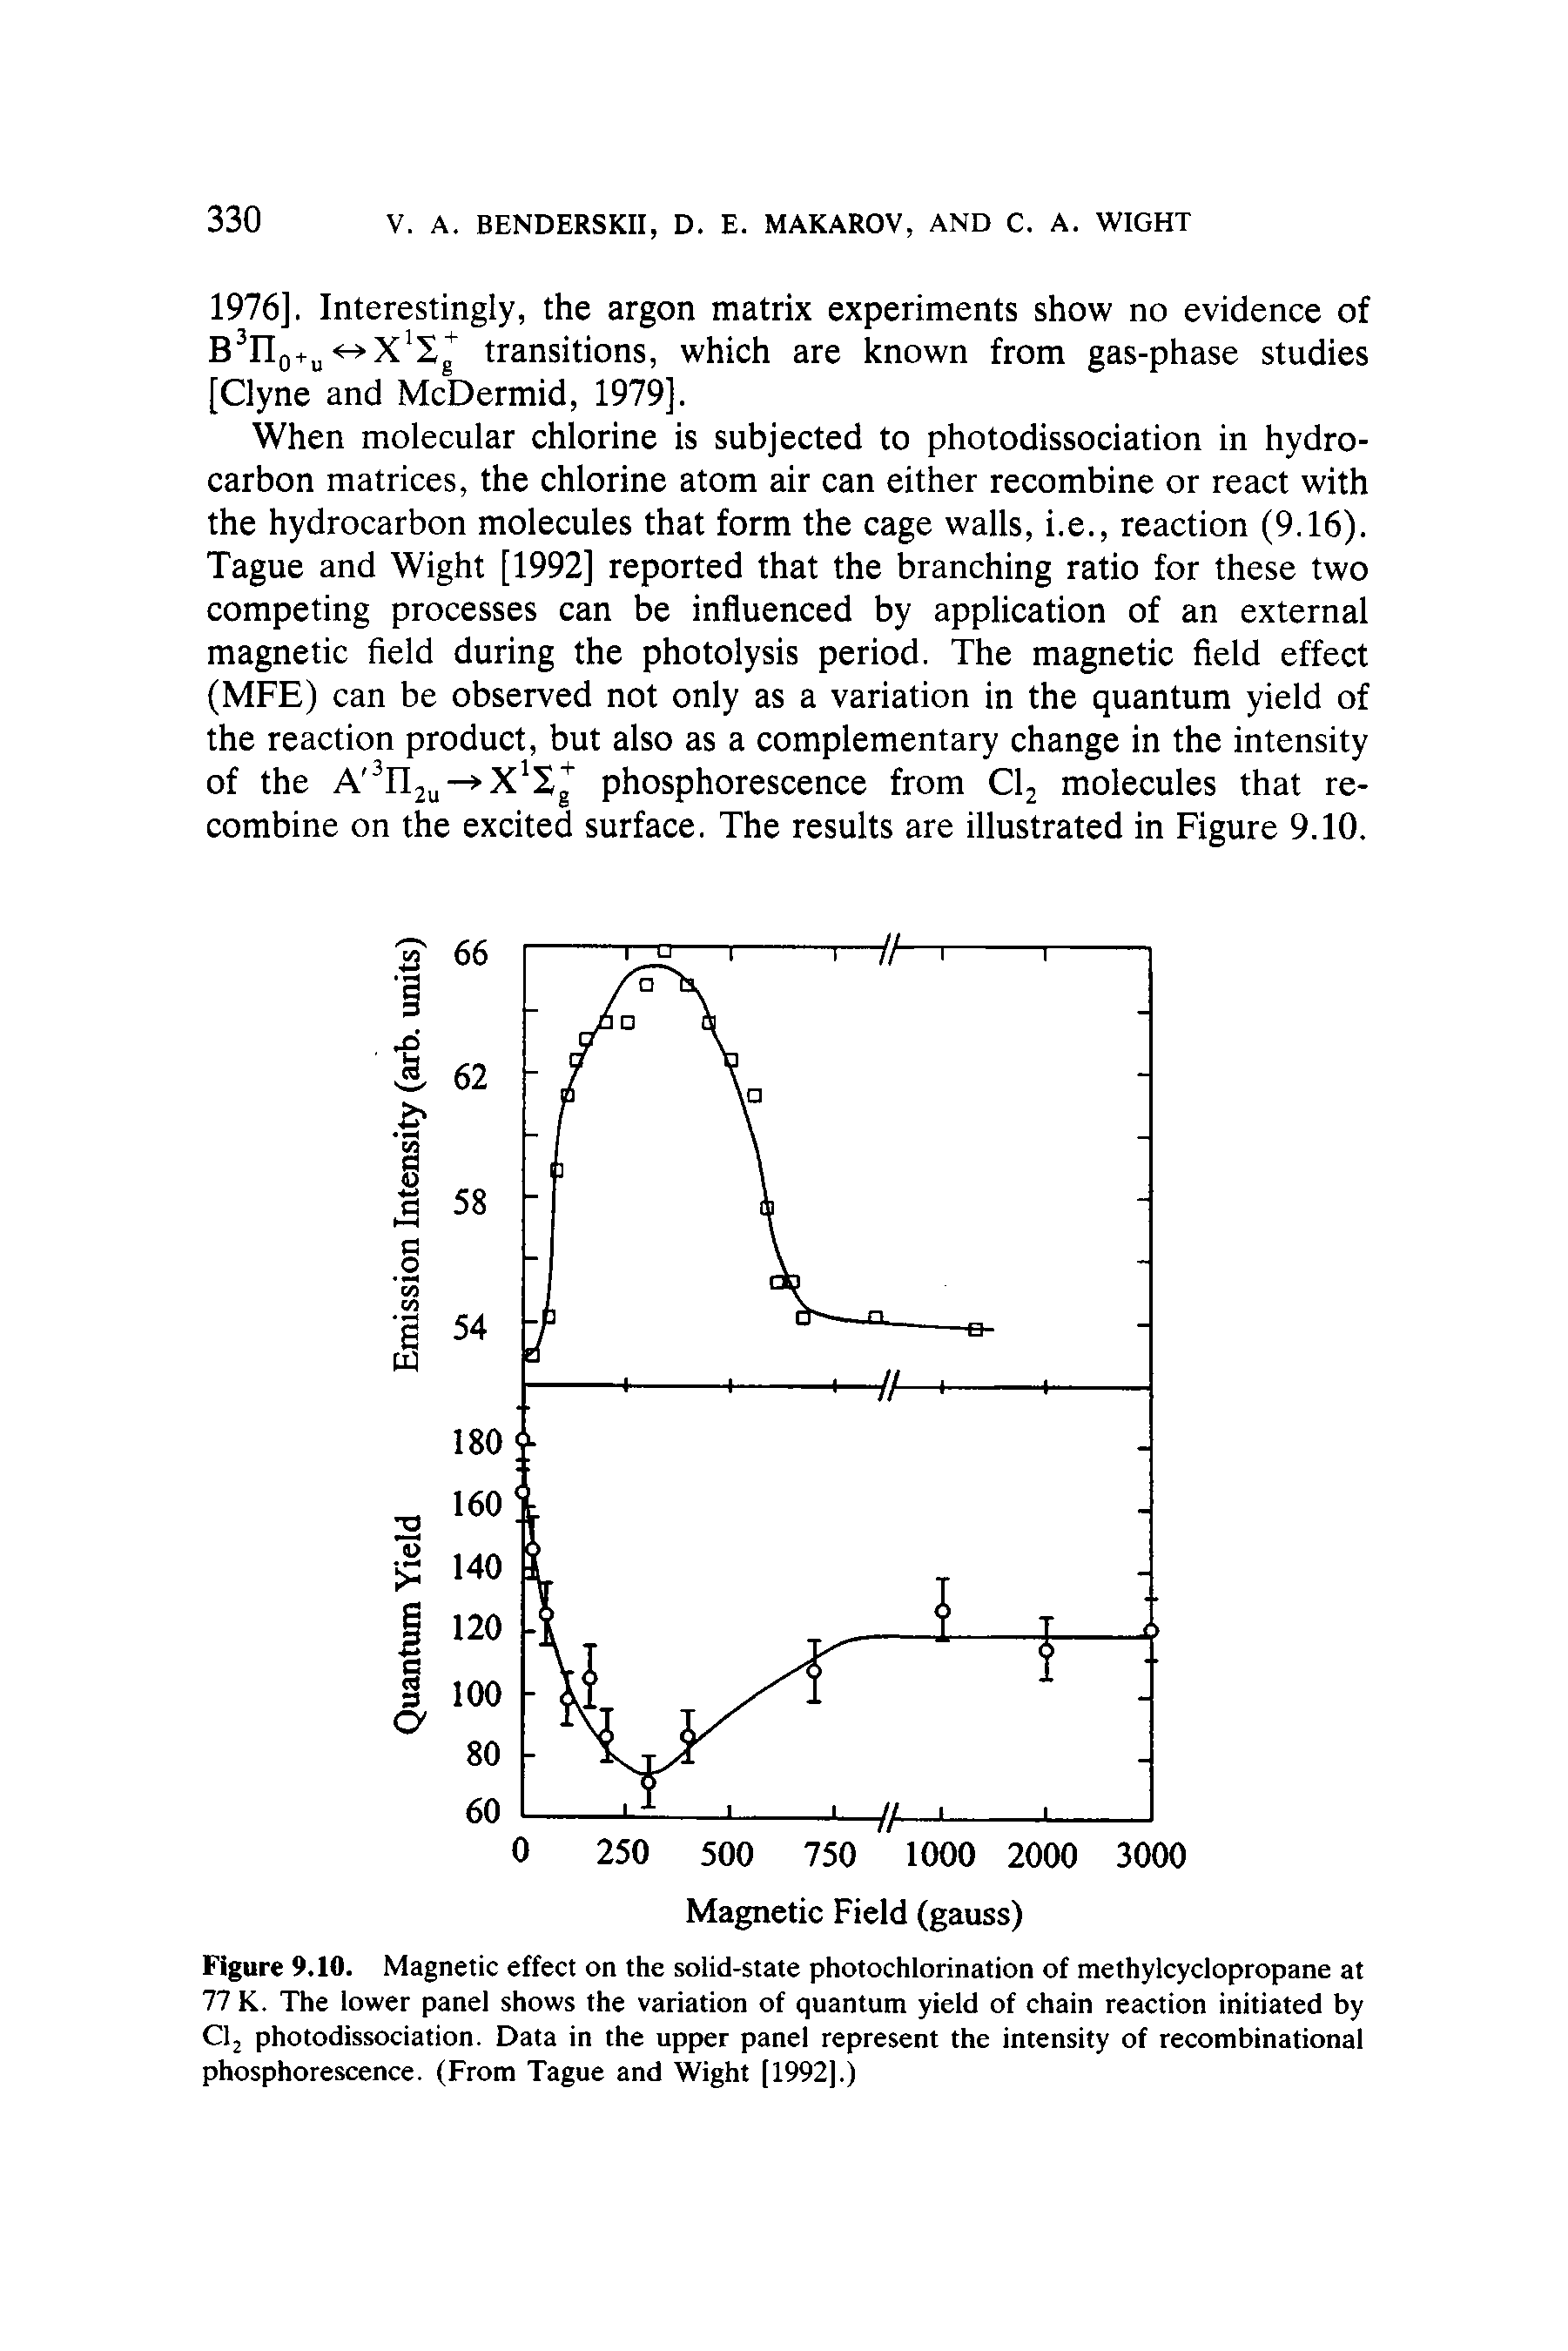 Figure 9.10. Magnetic effect on the solid-state photochlorination of methylcyclopropane at 77 K. The lower panel shows the variation of quantum yield of chain reaction initiated by Cl2 photodissociation. Data in the upper panel represent the intensity of recombinational phosphorescence. (From Tague and Wight [1992].)...